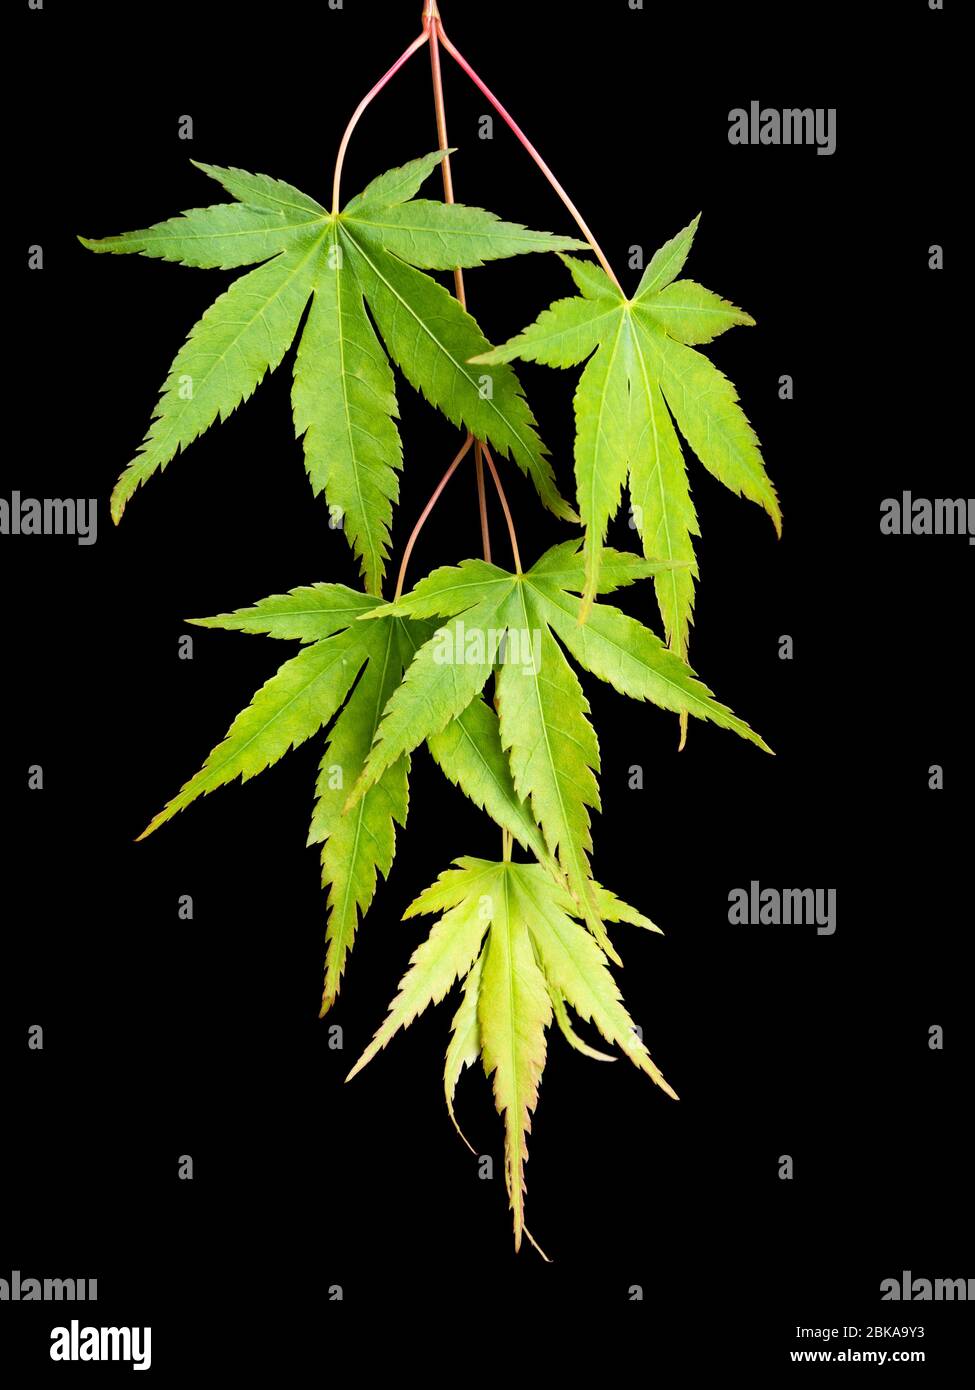 Backlit divided green foliage of the hardy small tree, Acer palmatum, on a black background Stock Photo